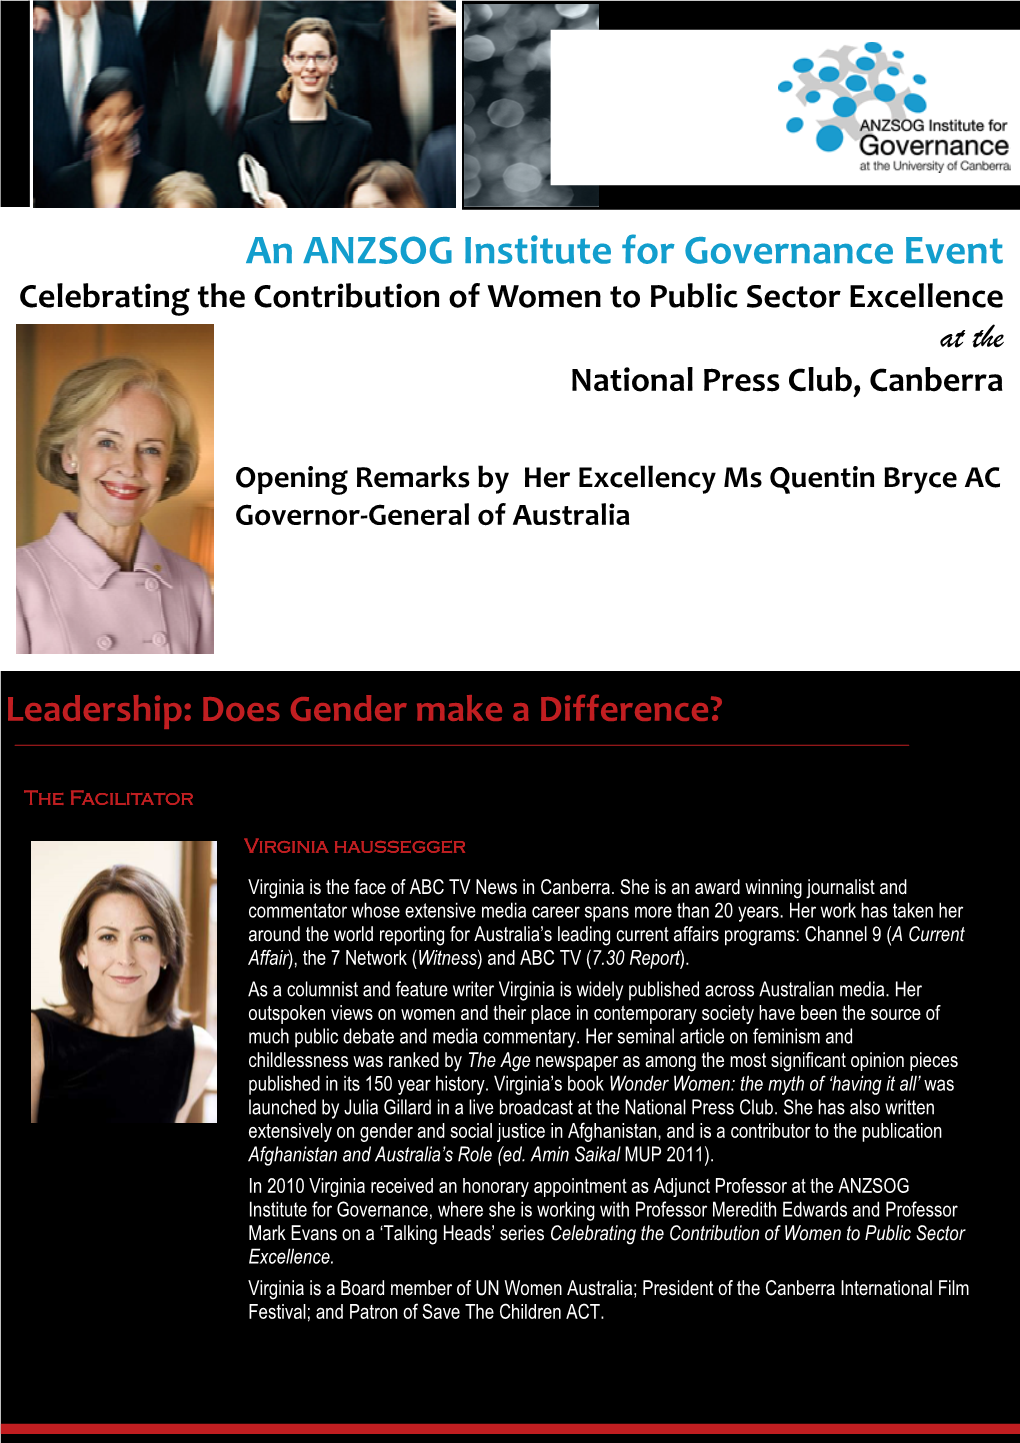 Leadership Does Gender Make a Difference.Pub